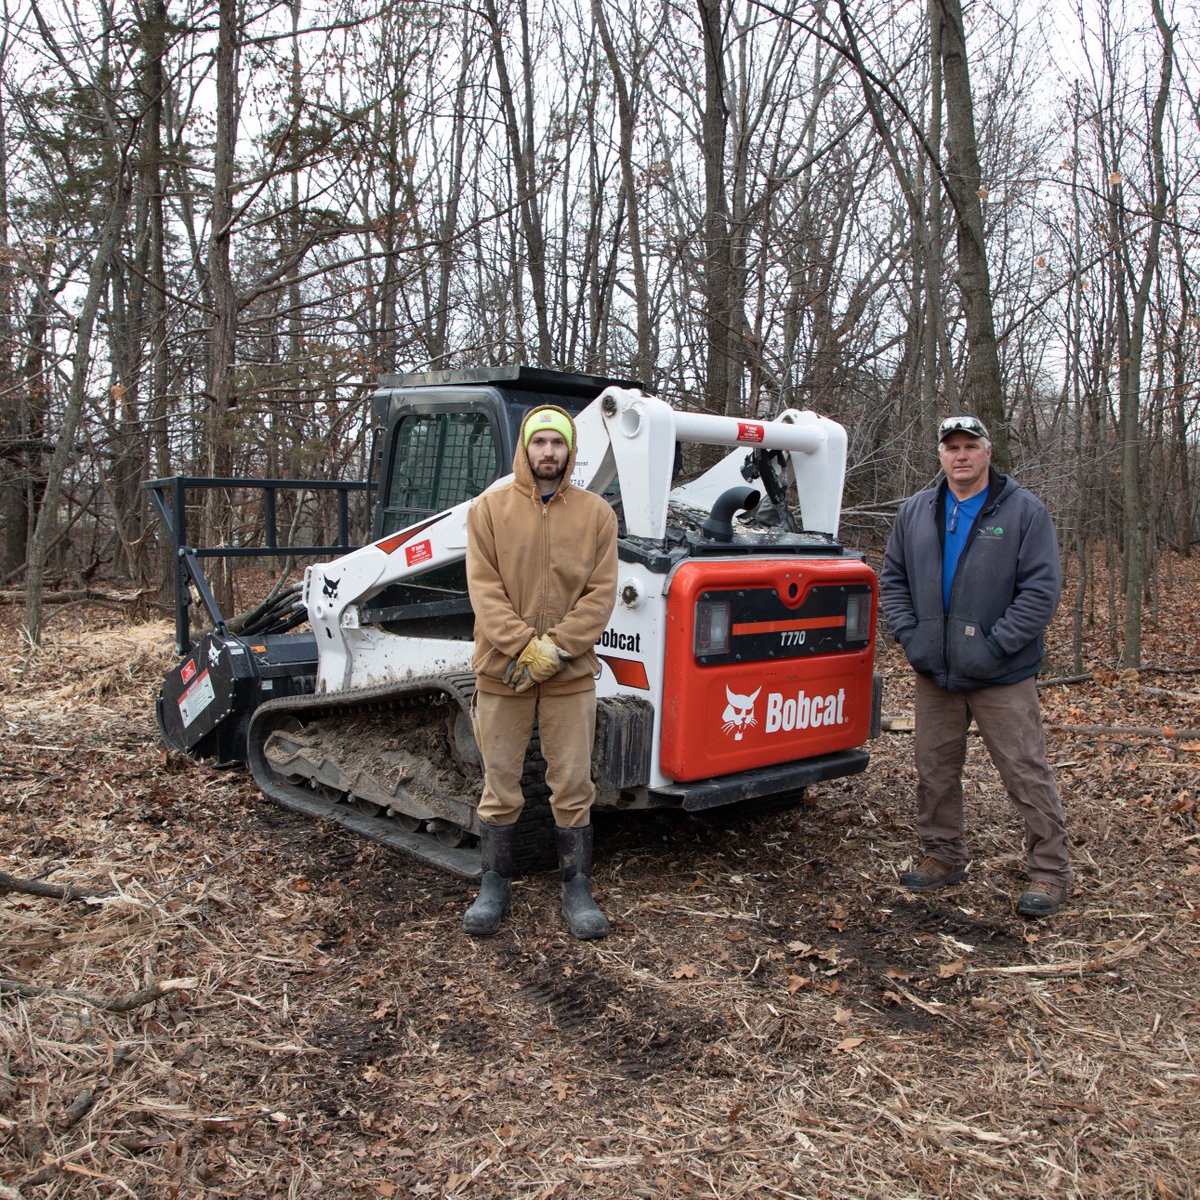 Bridging innovation with dedication, K&D Land Improvement showcases the synergy between equipment and environmental preservation.

Discover their commitment to timber and prairie conservation here: bit.ly/4bSJAmb 

#OneToughAnimal #WeAreBobcat